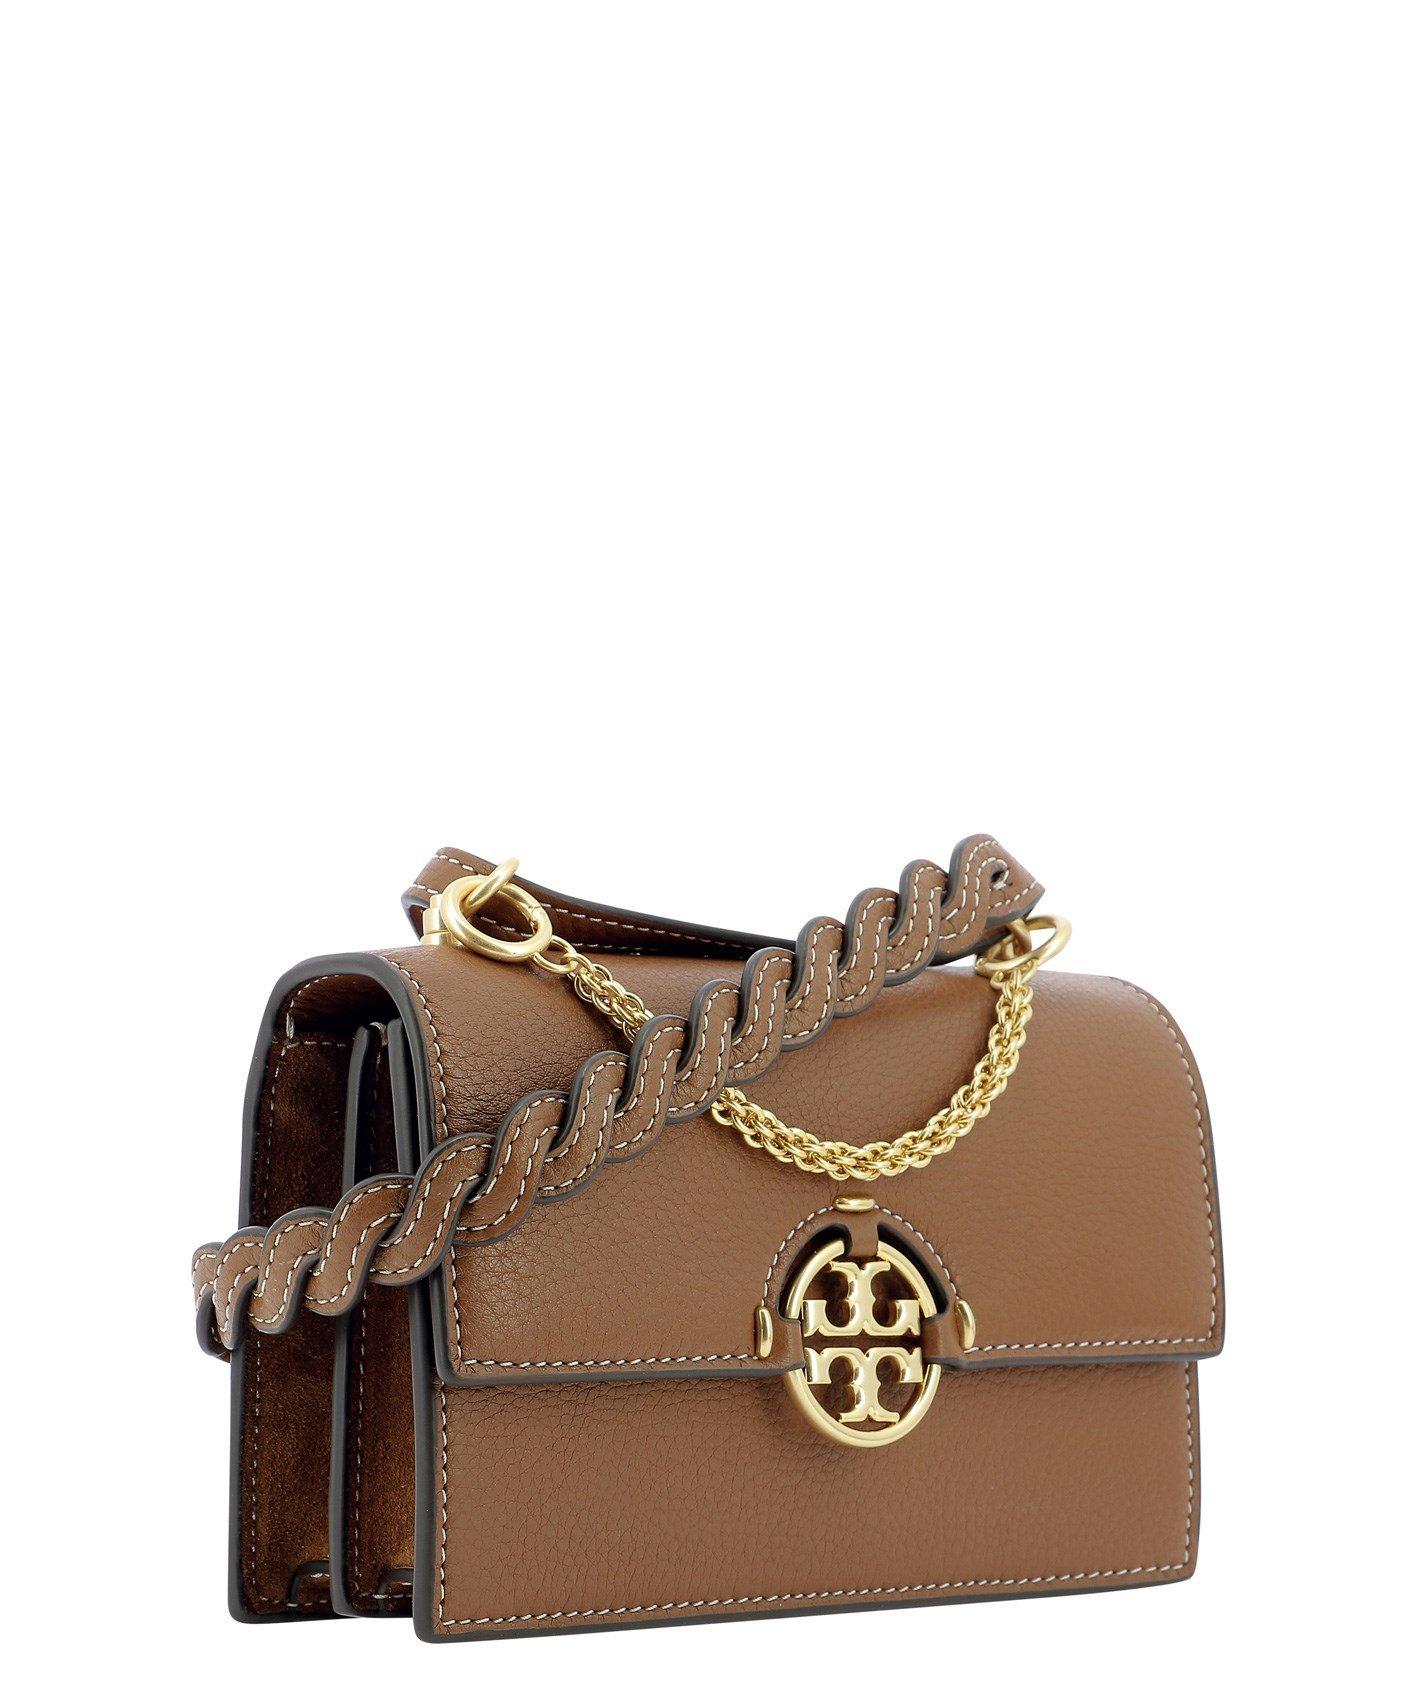 Tory Burch Leather 